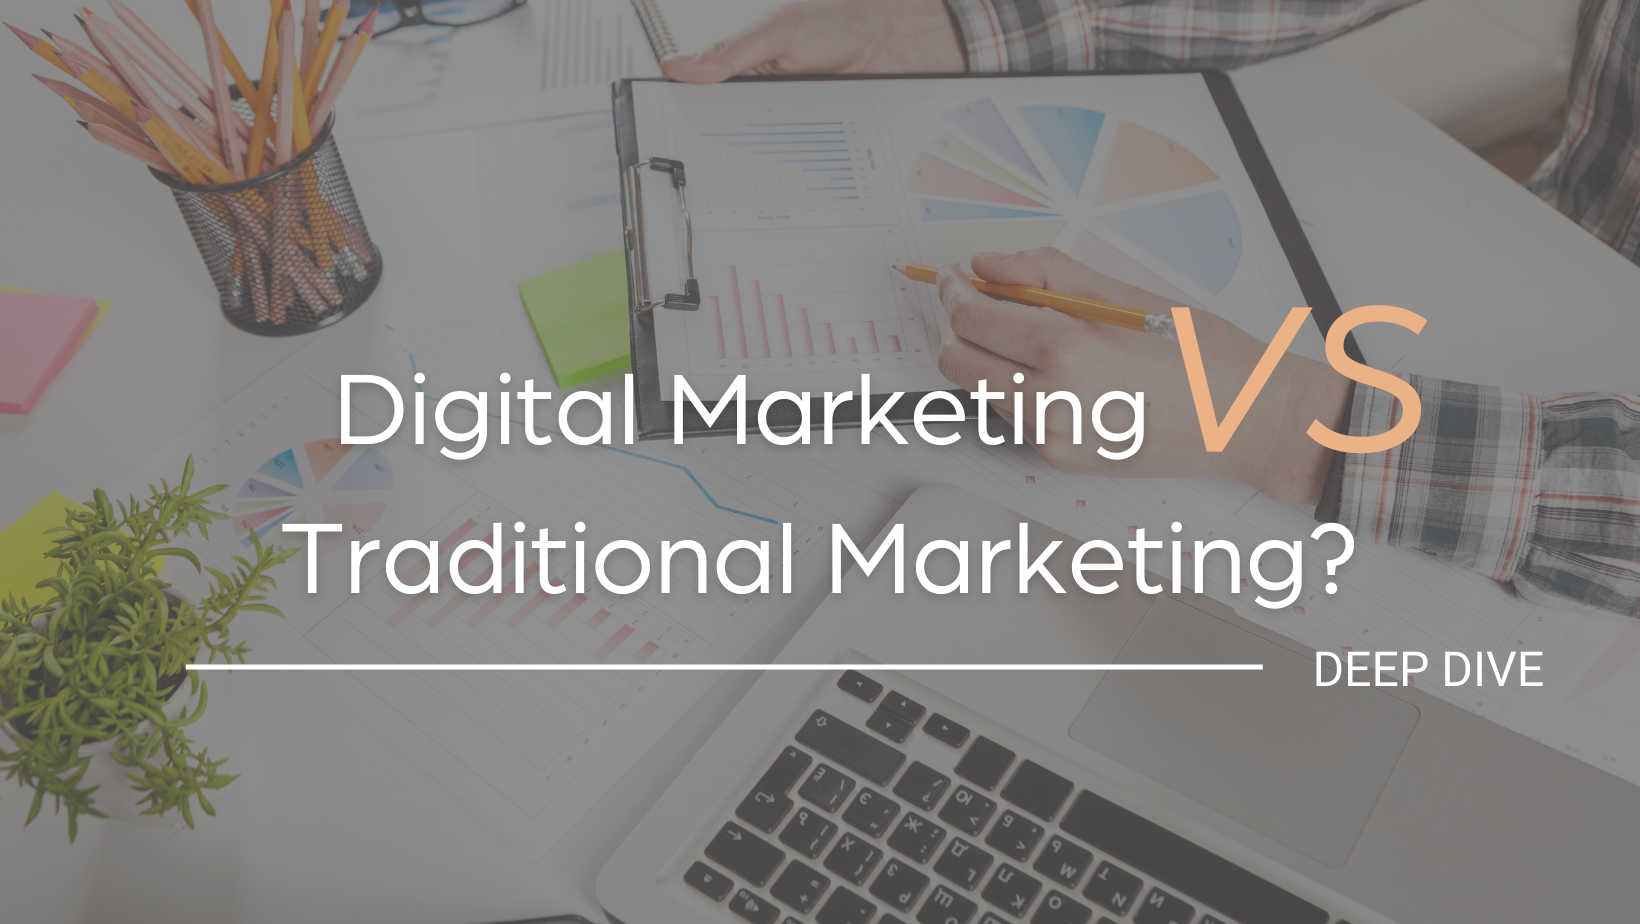 Will Digital Marketing Replace Traditional Marketing? Deep Dive